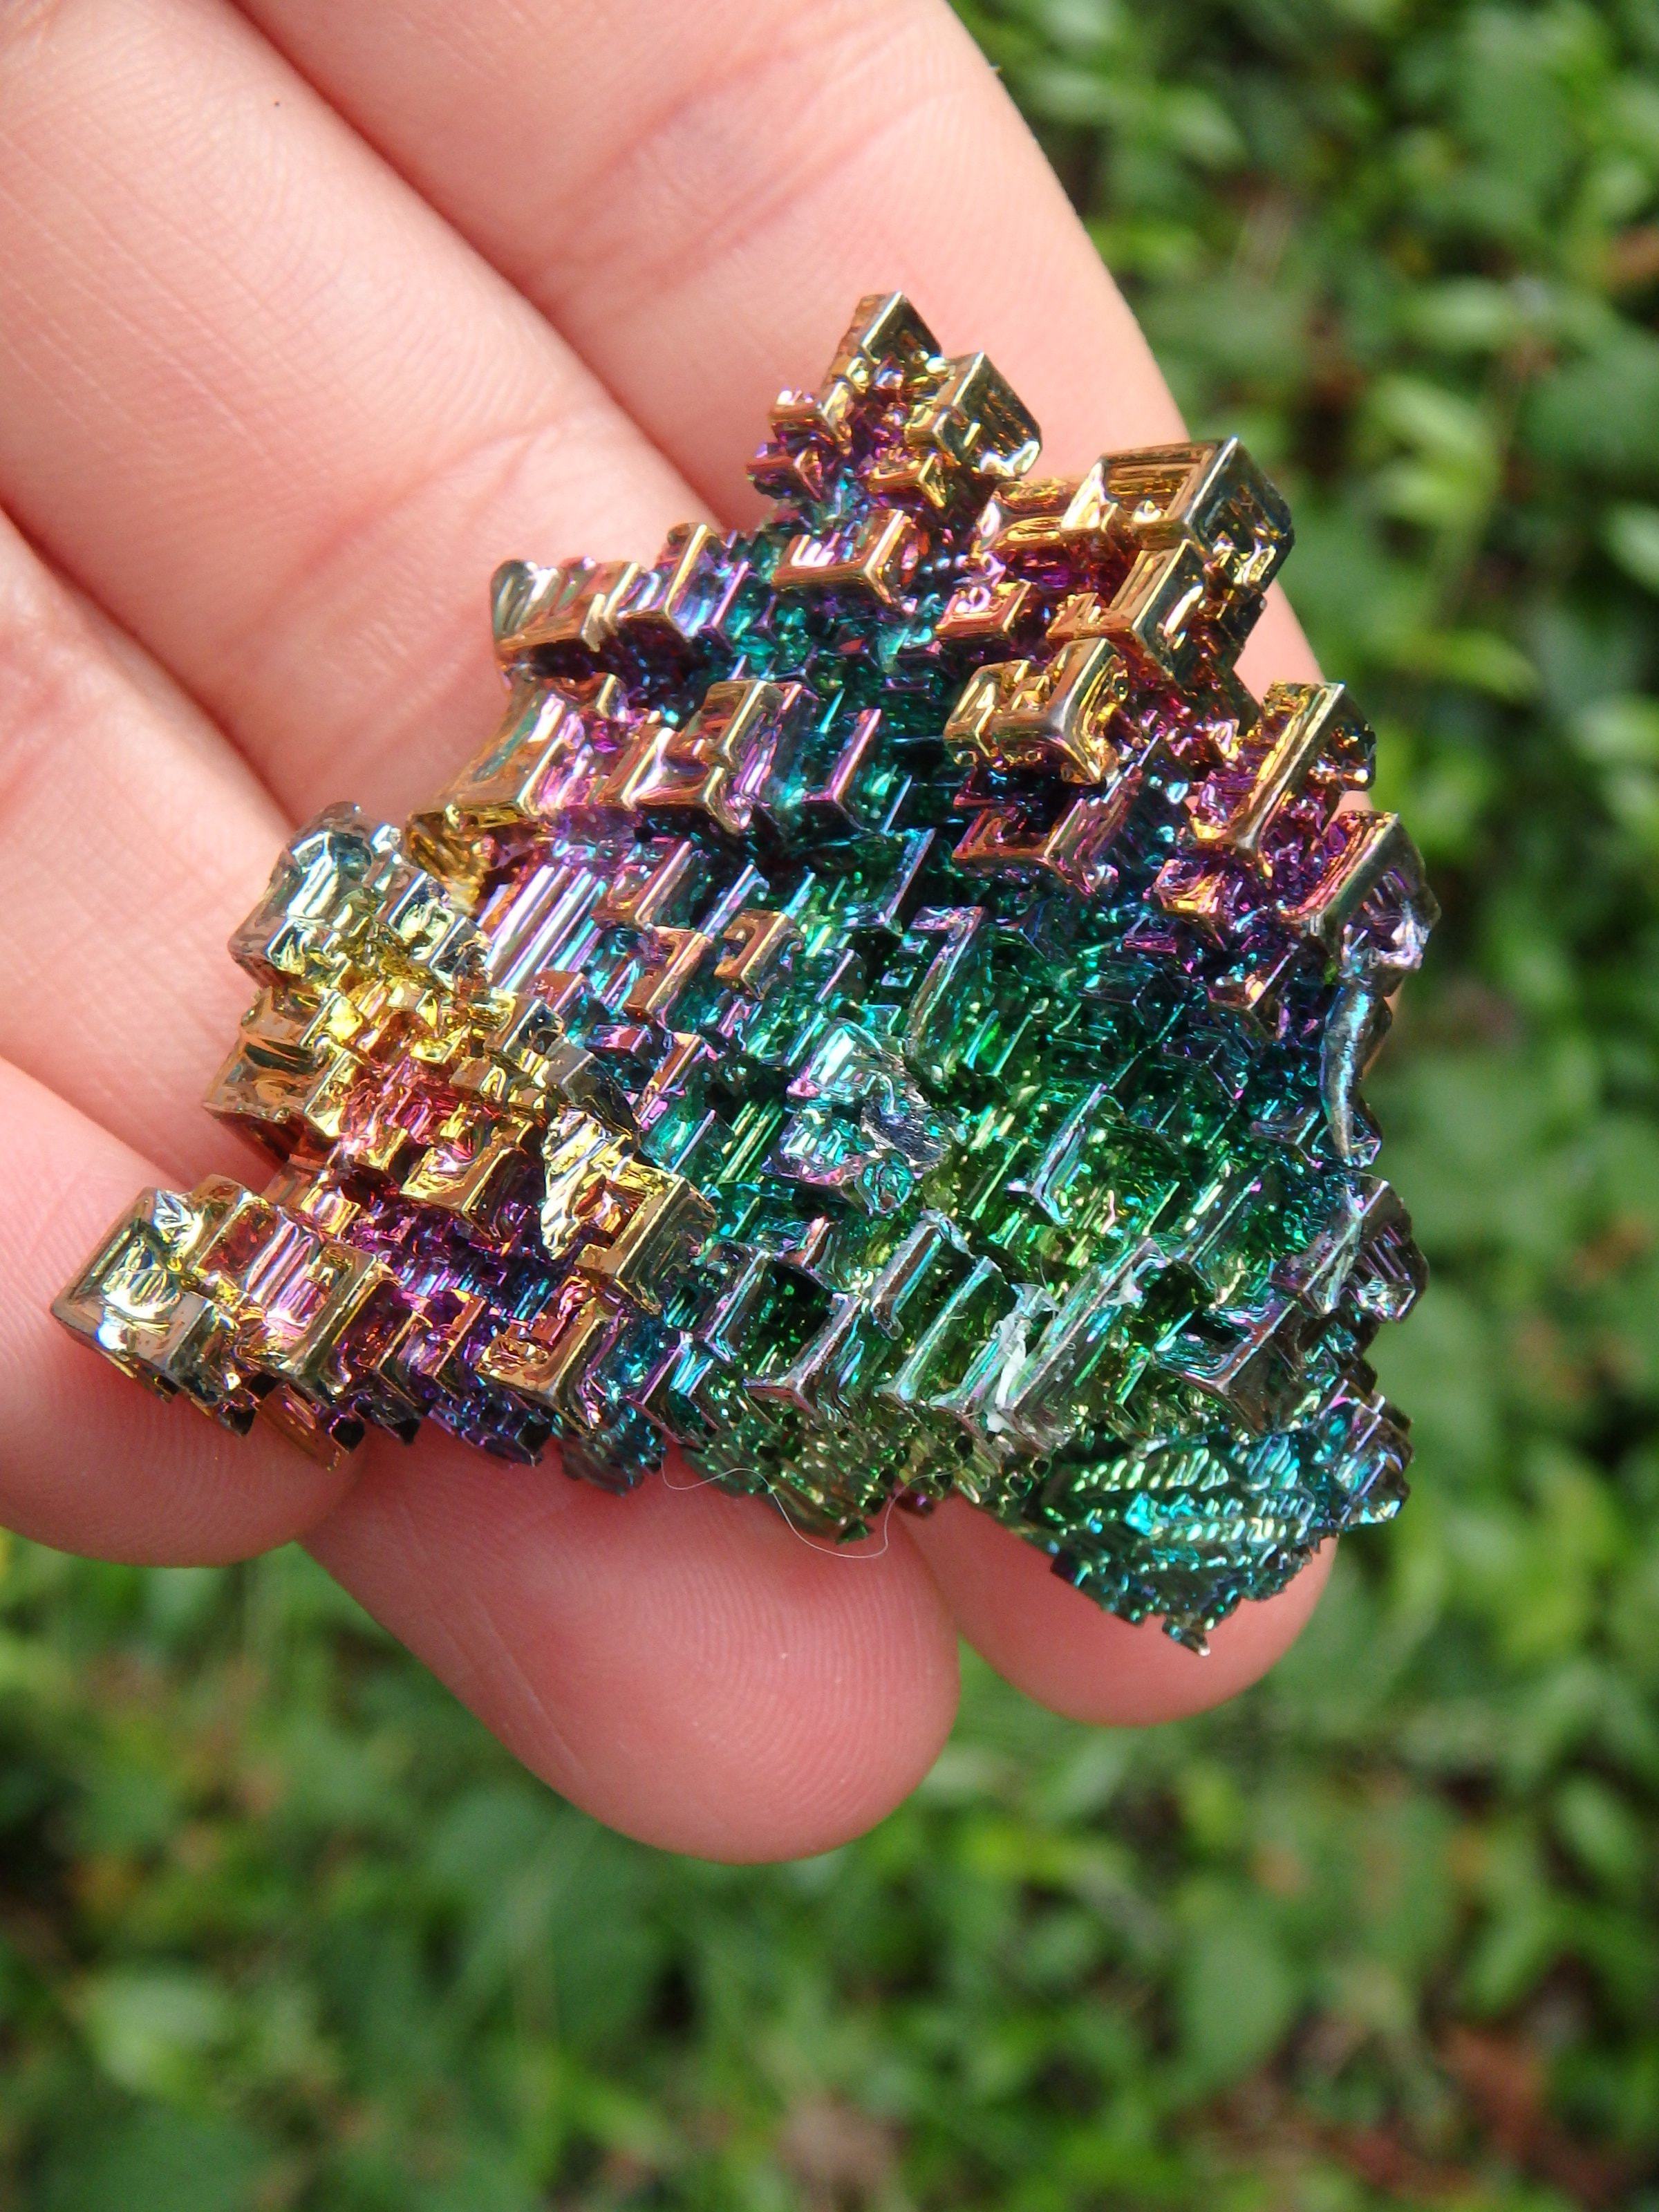 3D Structure Rainbow Bismuth Specimen From Germany - Earth Family Crystals